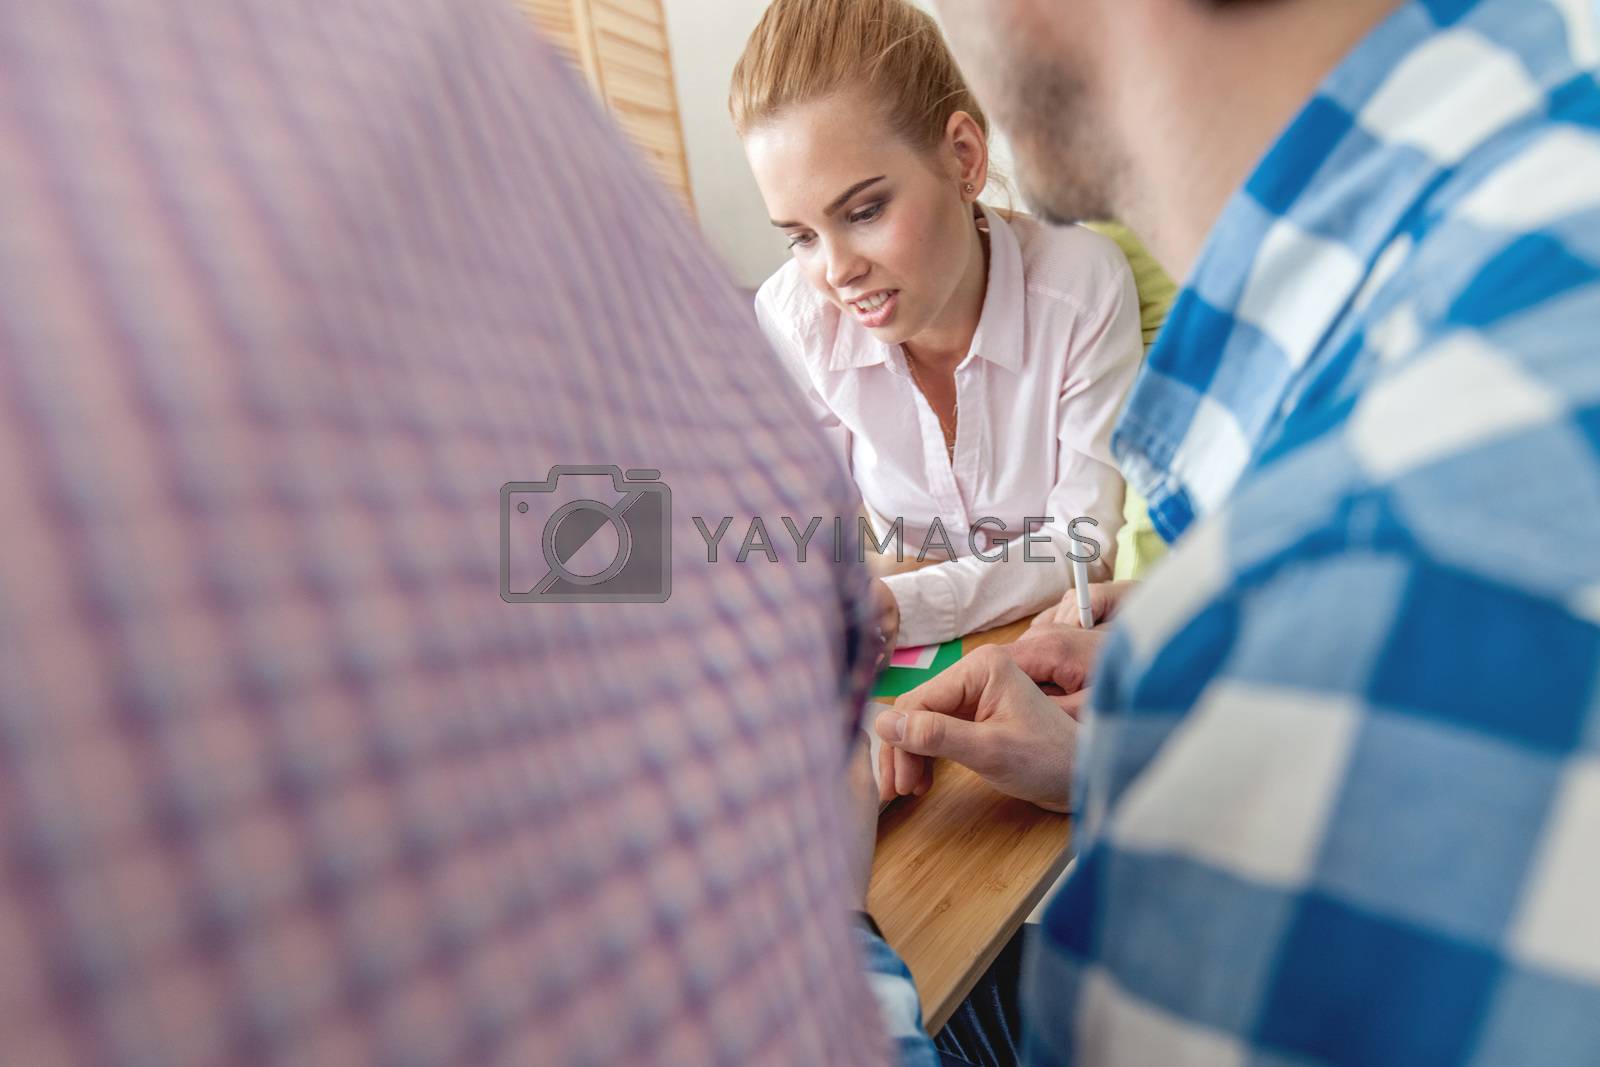 Royalty free image of People discussing papers by ALotOfPeople